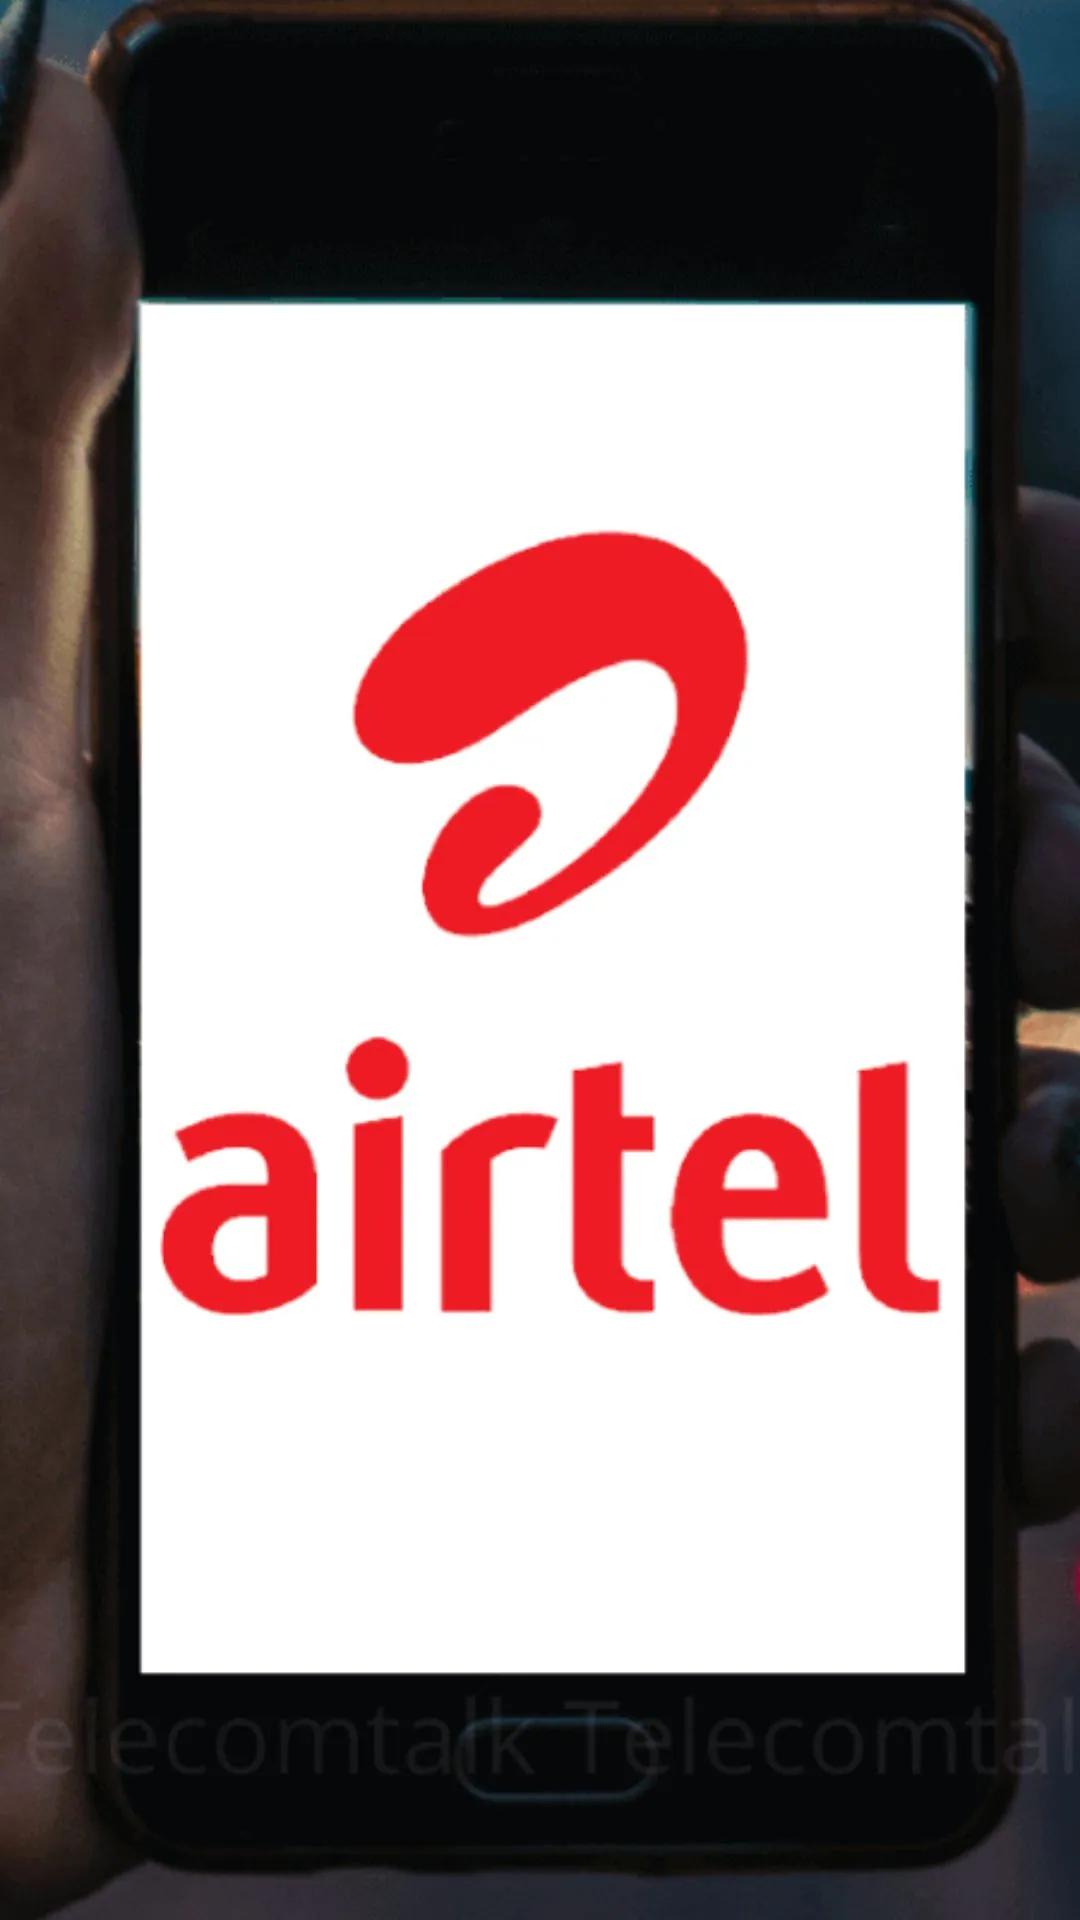 Owner and Net Worth of Airtel (9)